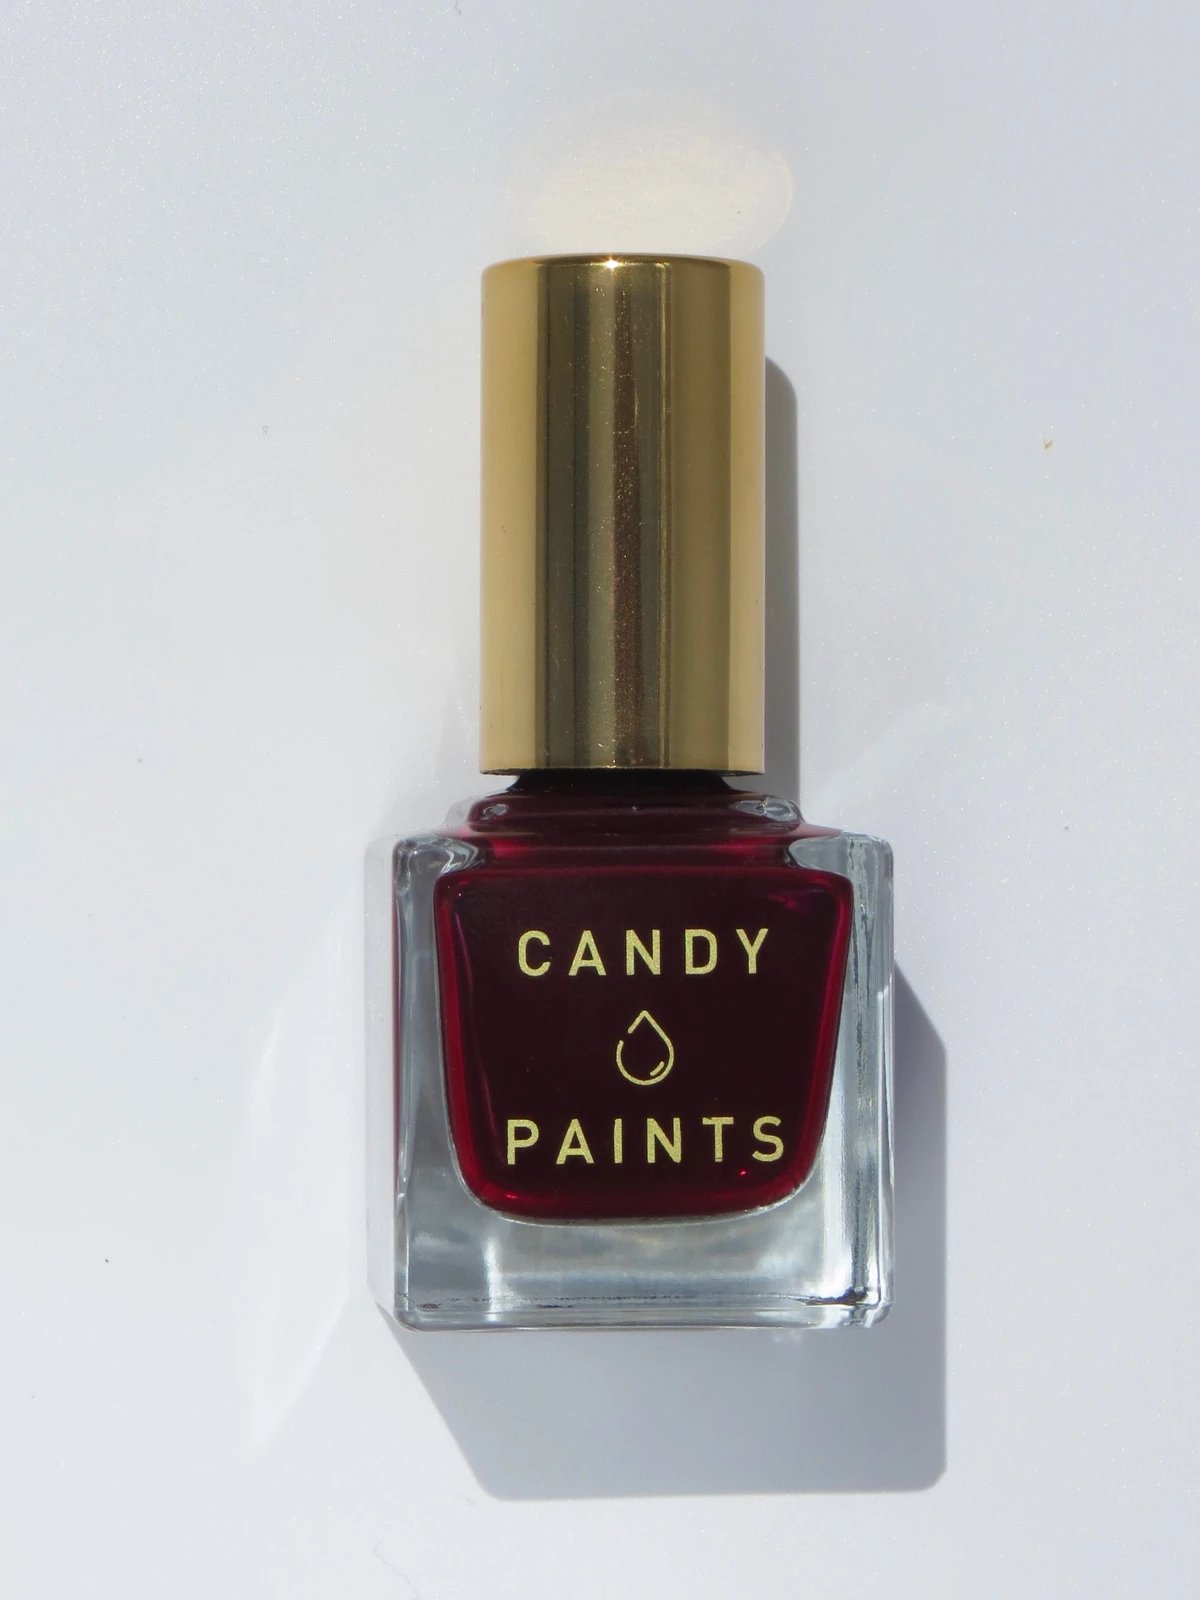 Candy Paints Nail Polish & Remover